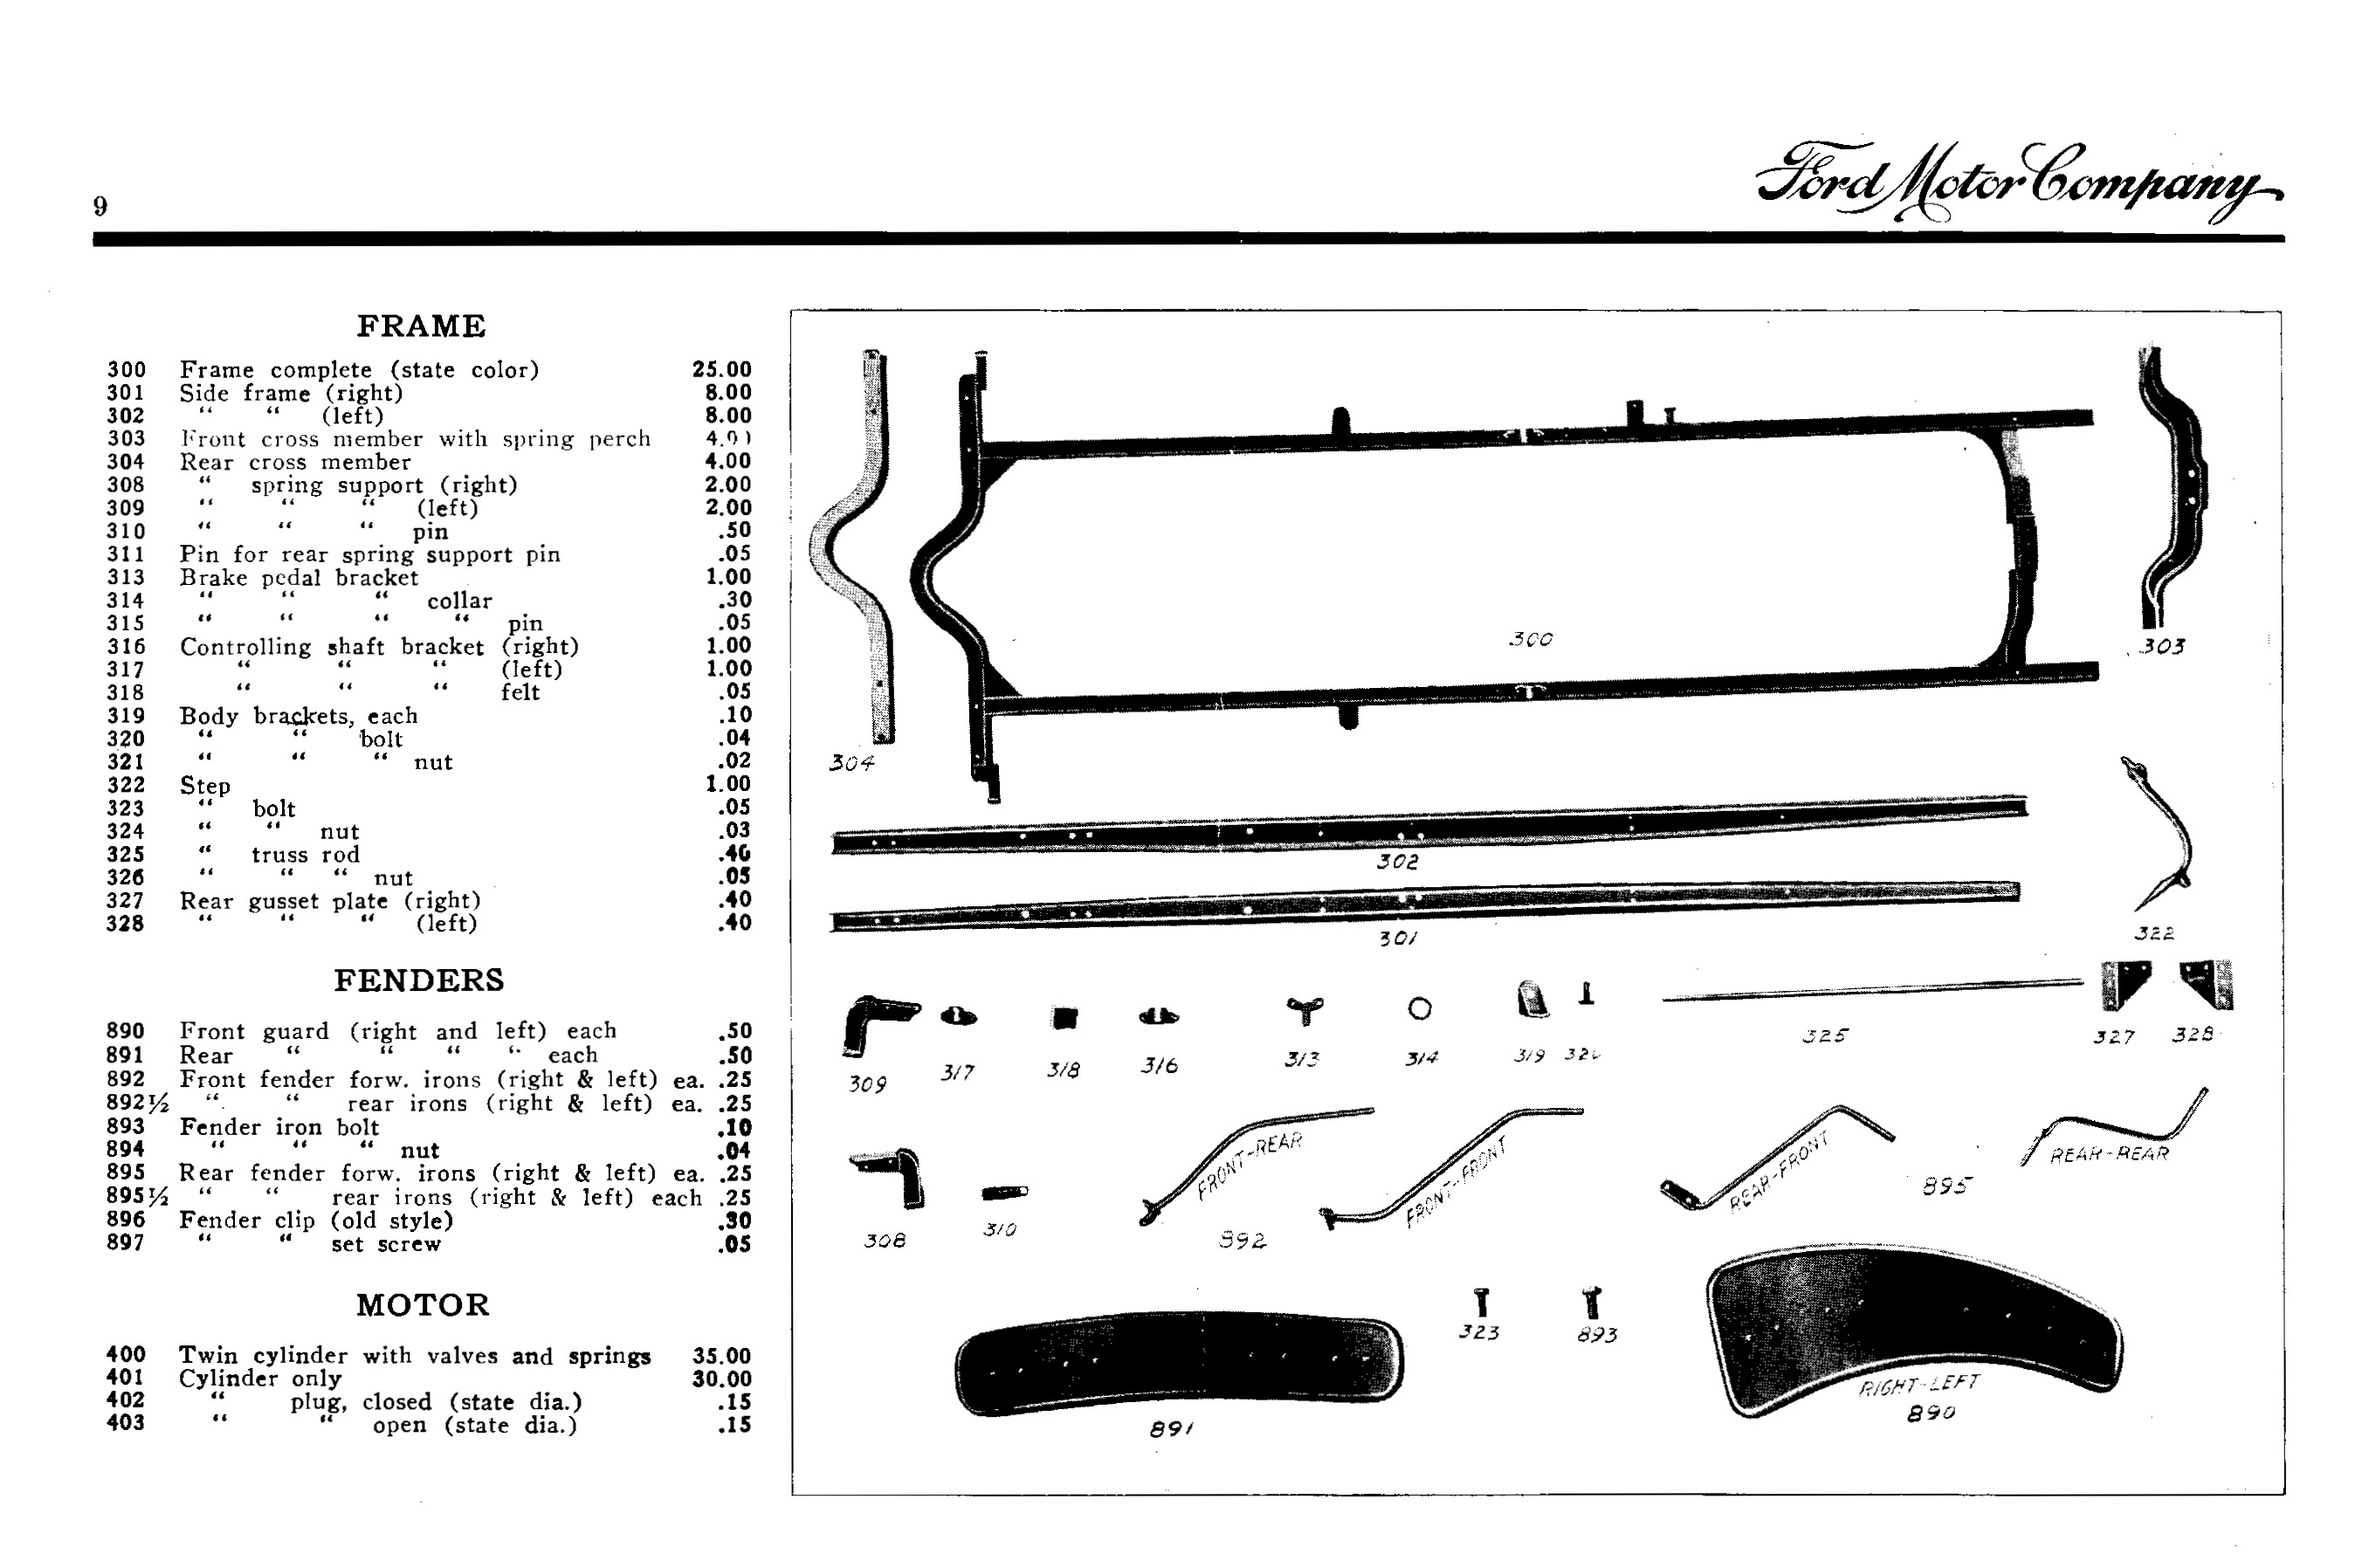 1907_Ford_Roadster_Parts_List-08